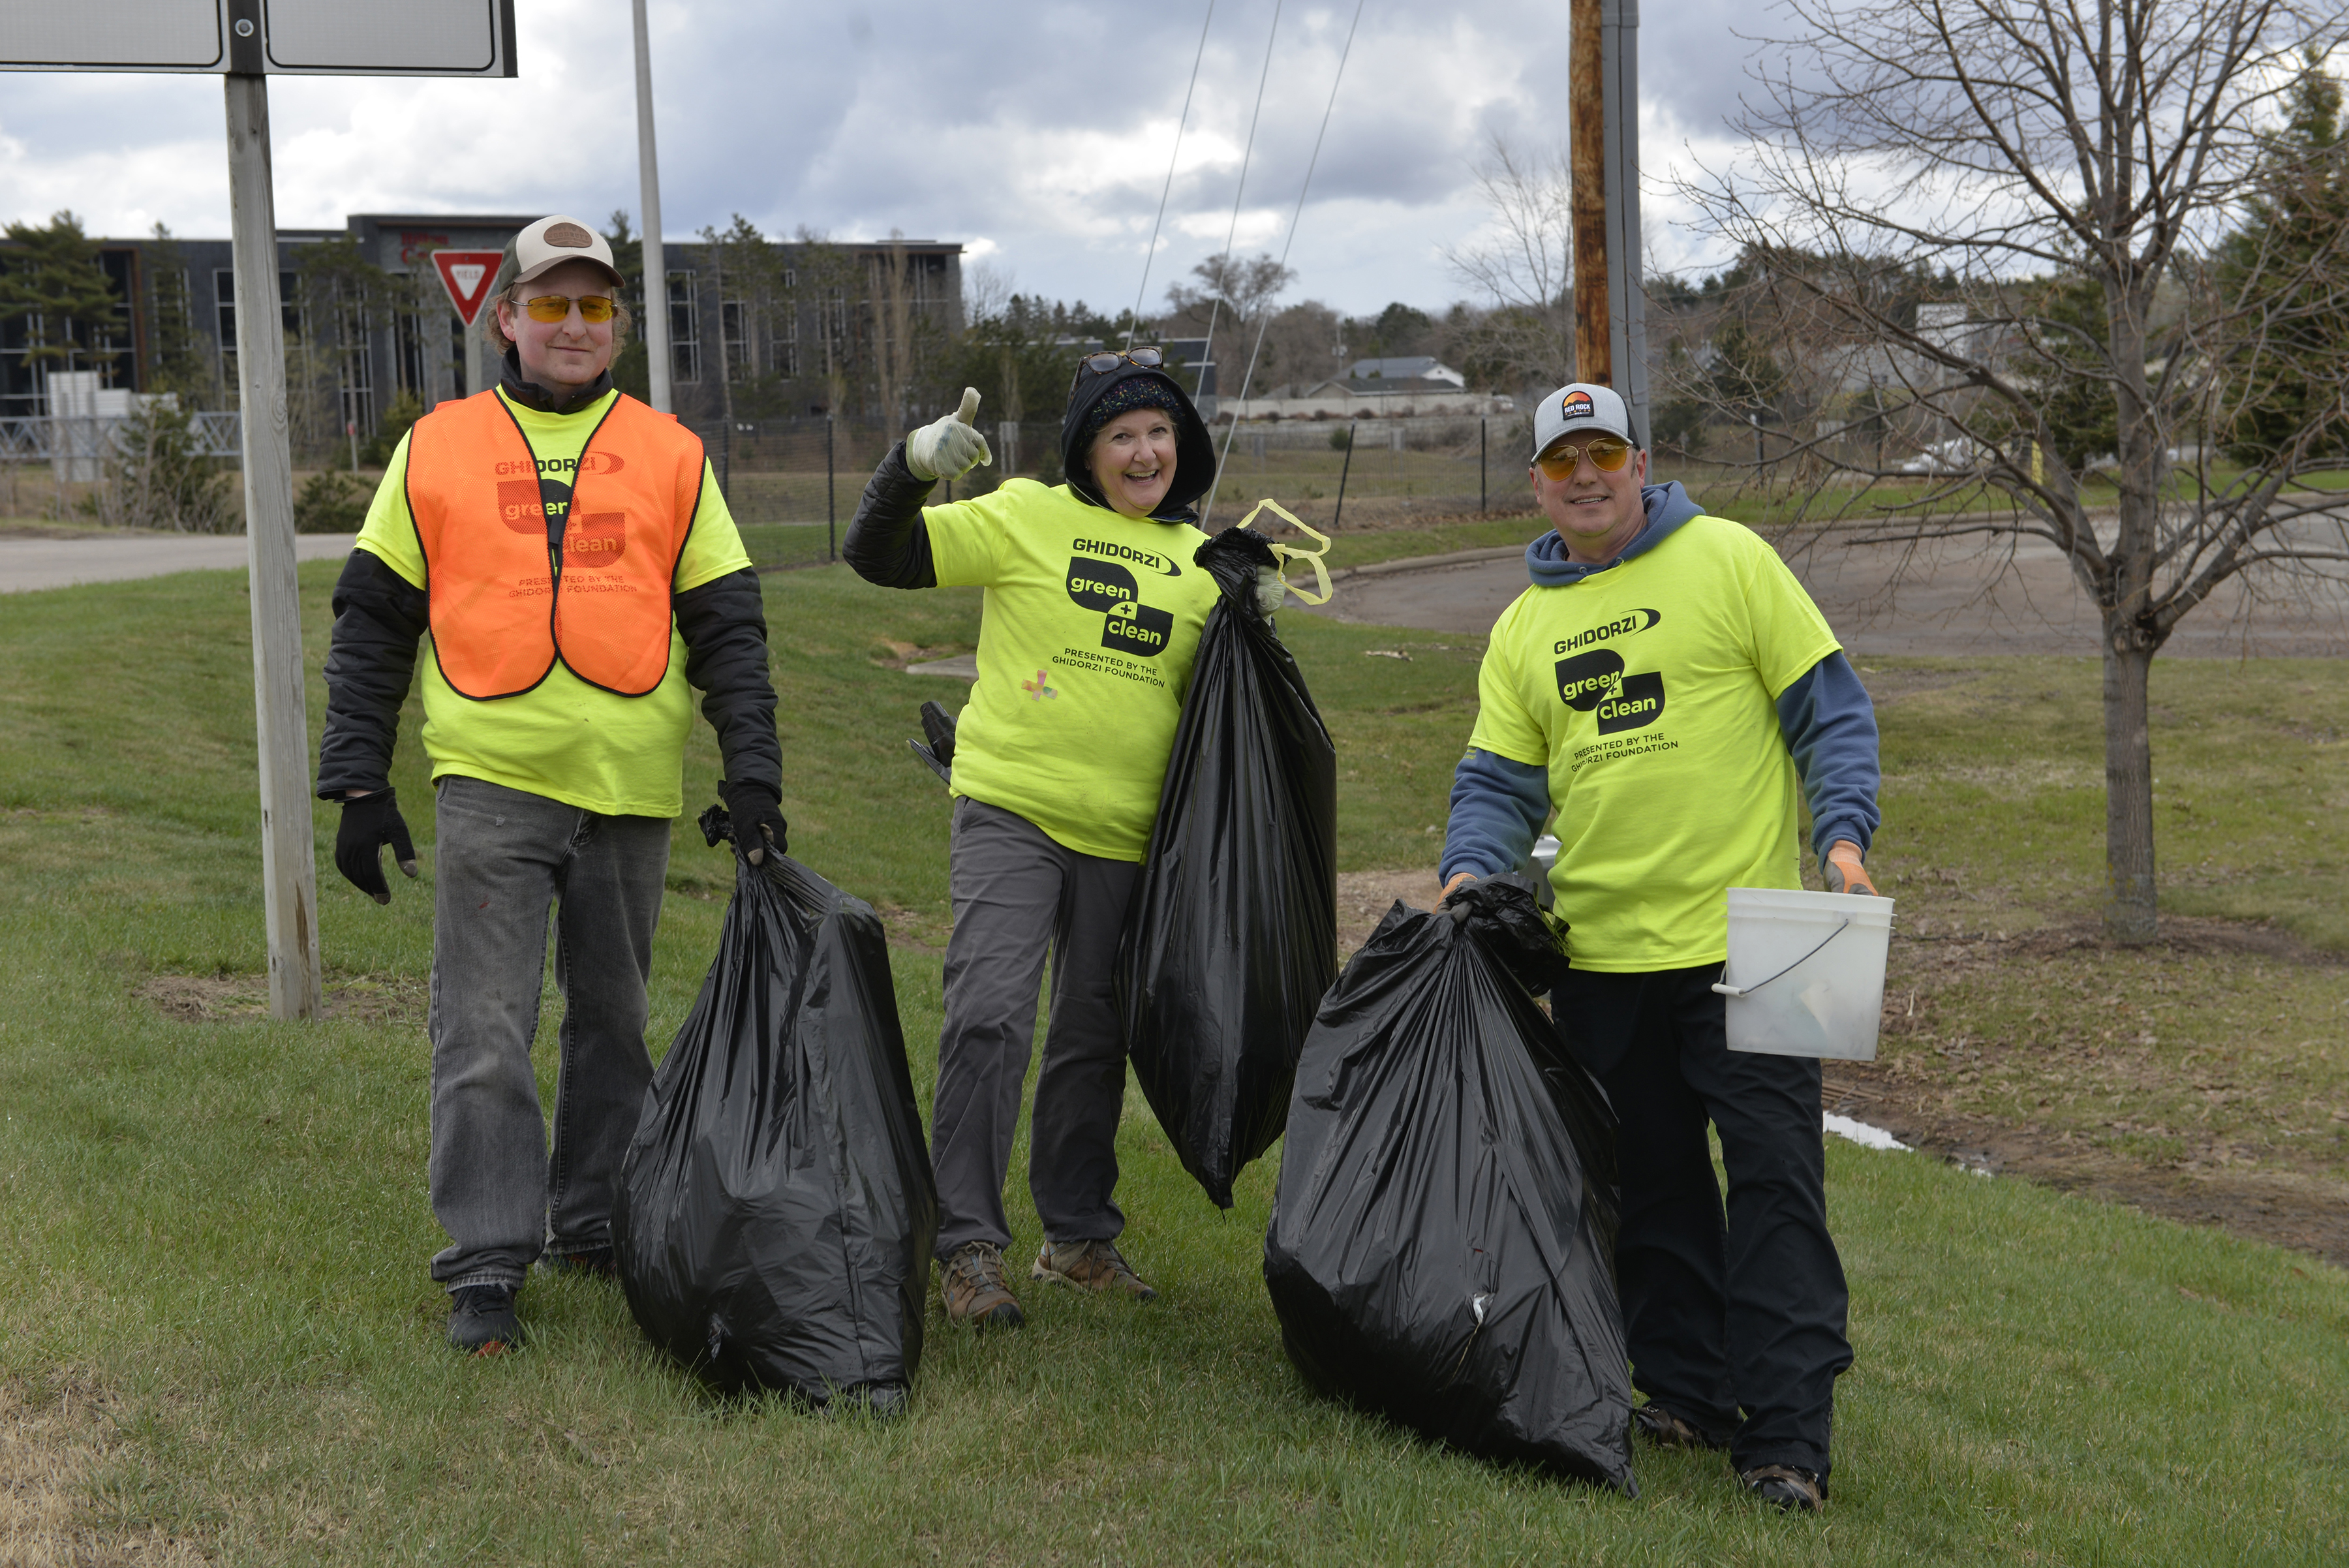 Ghidorzi Green and Clean Volunteers Overcome Wintery Weather to Remove 4.16 Tons of Trash from Greater Wausau for a Total of 37.62 Tons Since Event Began